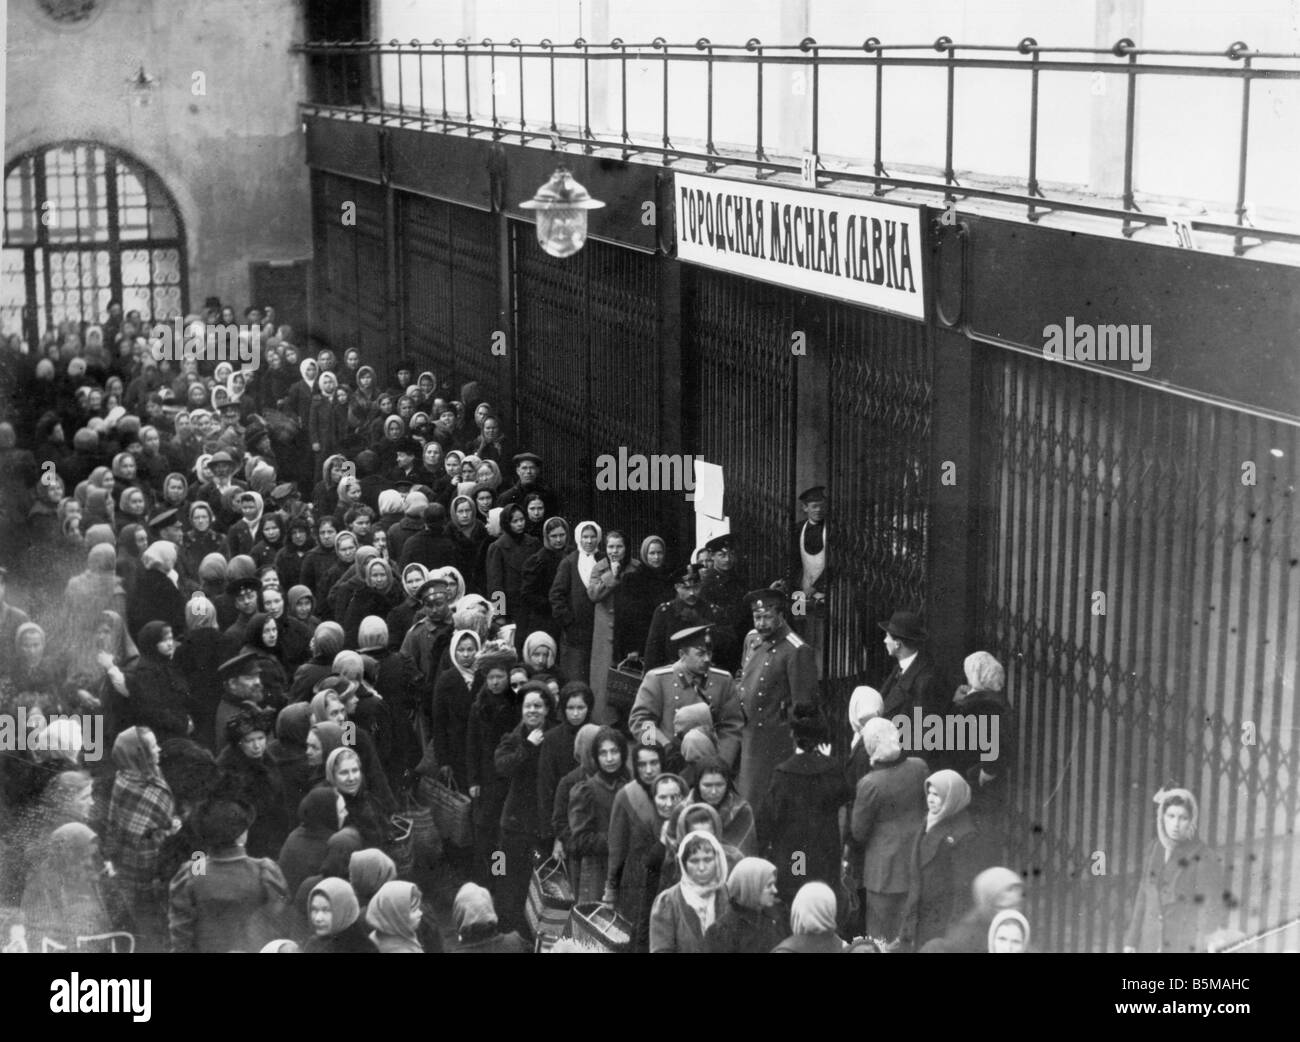 2 G55 W2 1915 2 Russia Queue outside a grocery shop History World War I War economy Russia Queue of people in front of a grocery Stock Photo